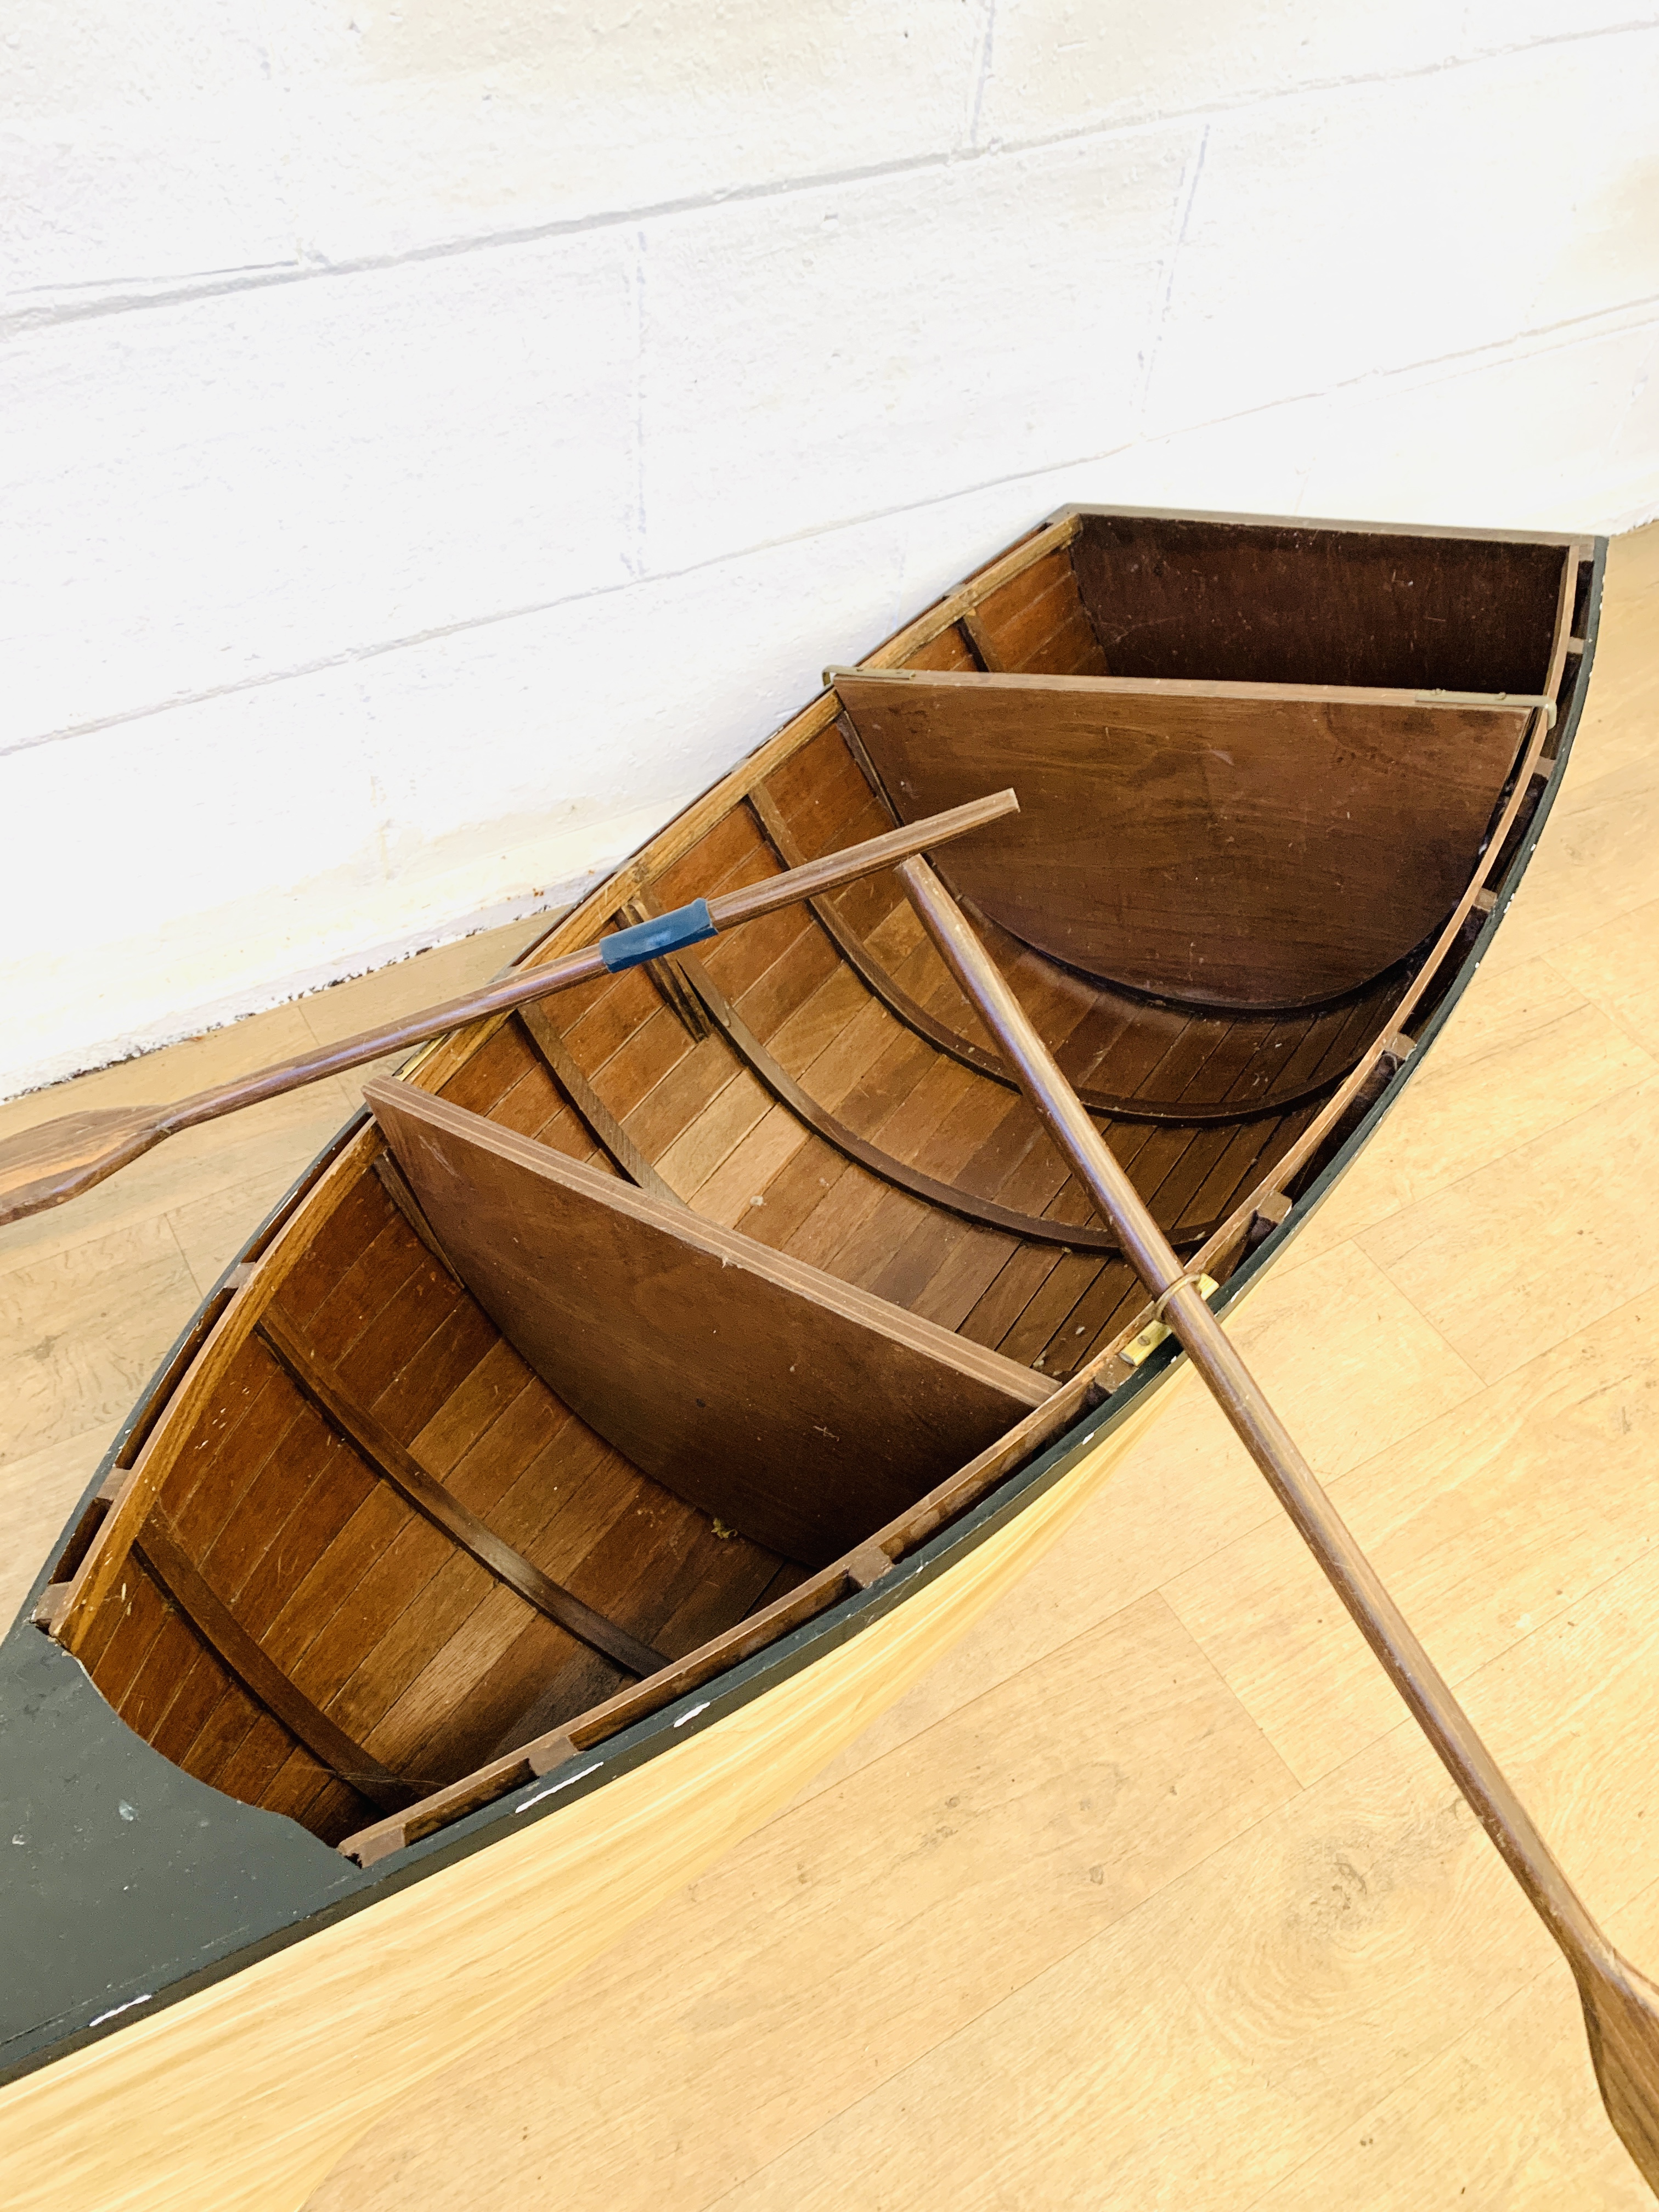 Model rowing boat - Image 4 of 4